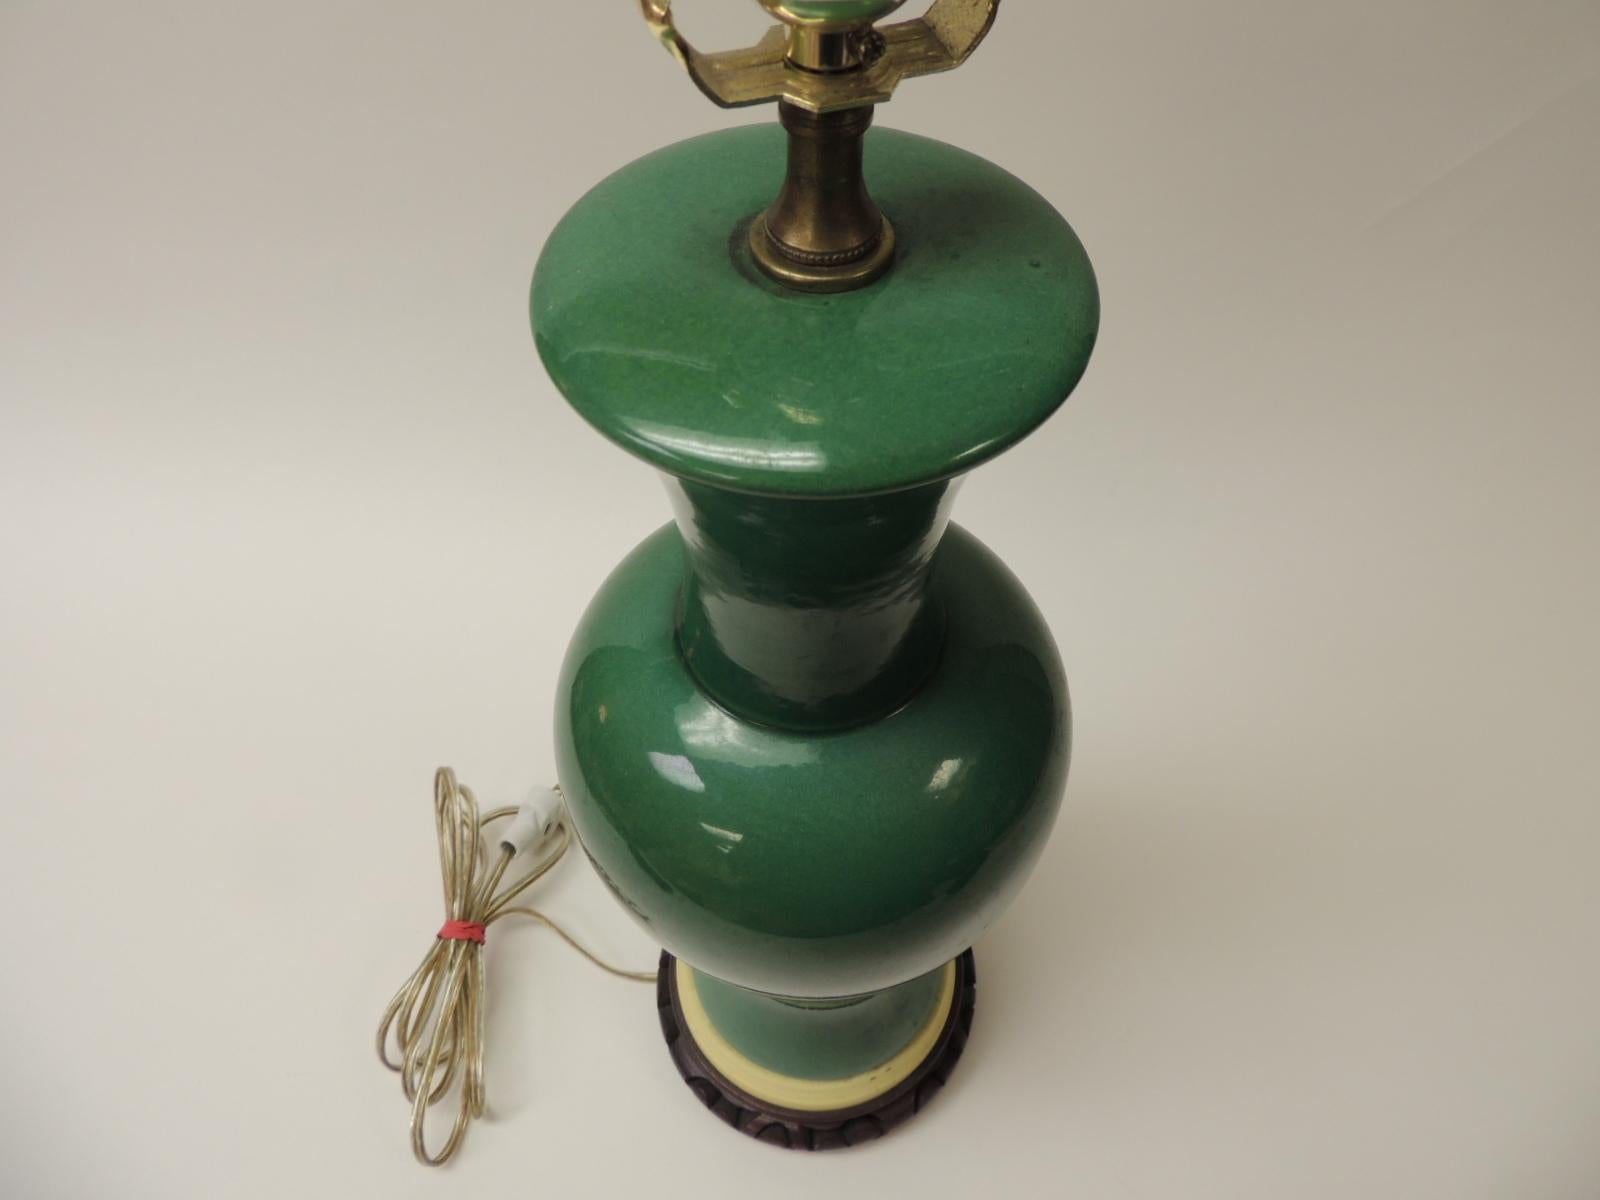 Hand-Crafted Vintage Green Ceramic Lamp with Brass Fittings